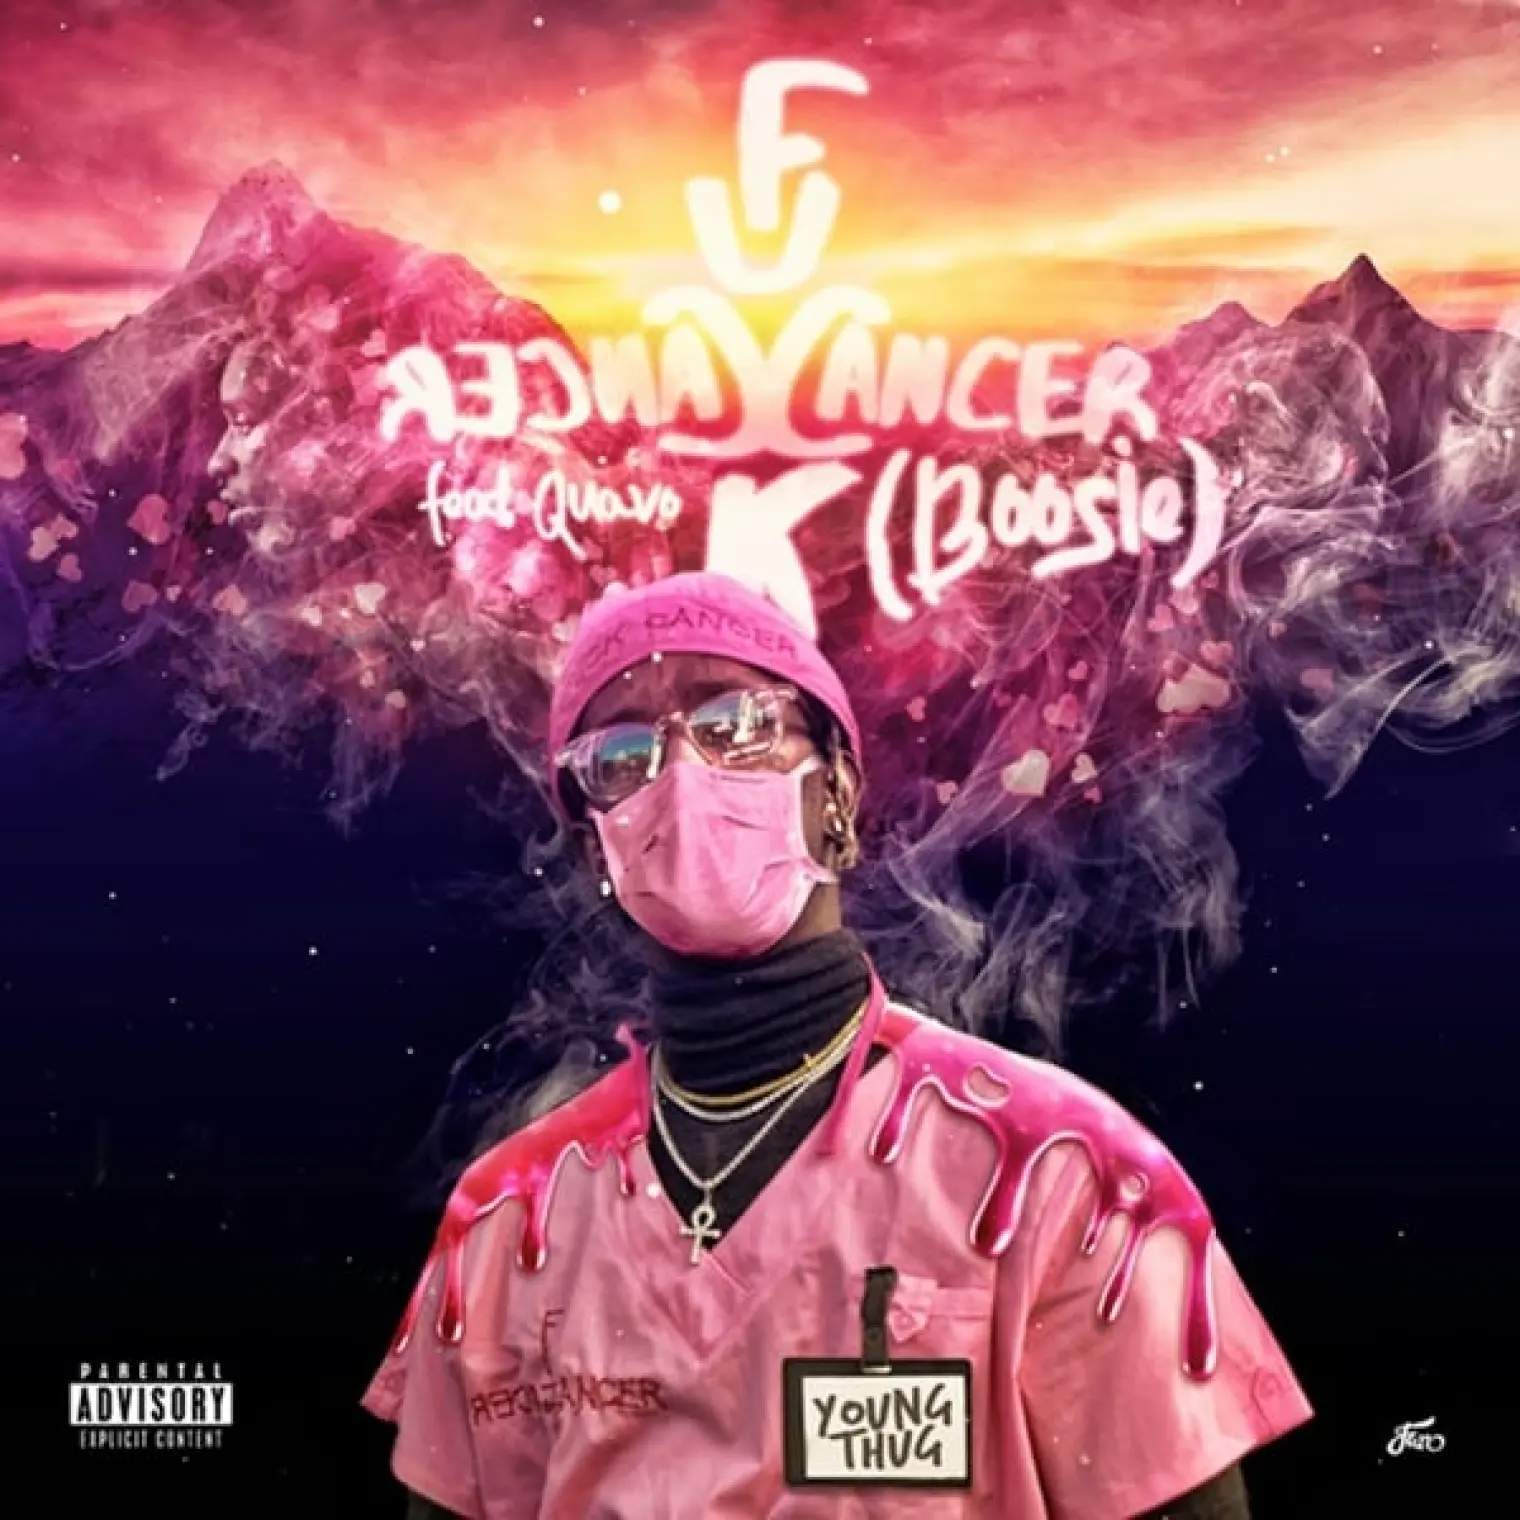 F Cancer (Boosie) [feat. Quavo] -  Young Thug 